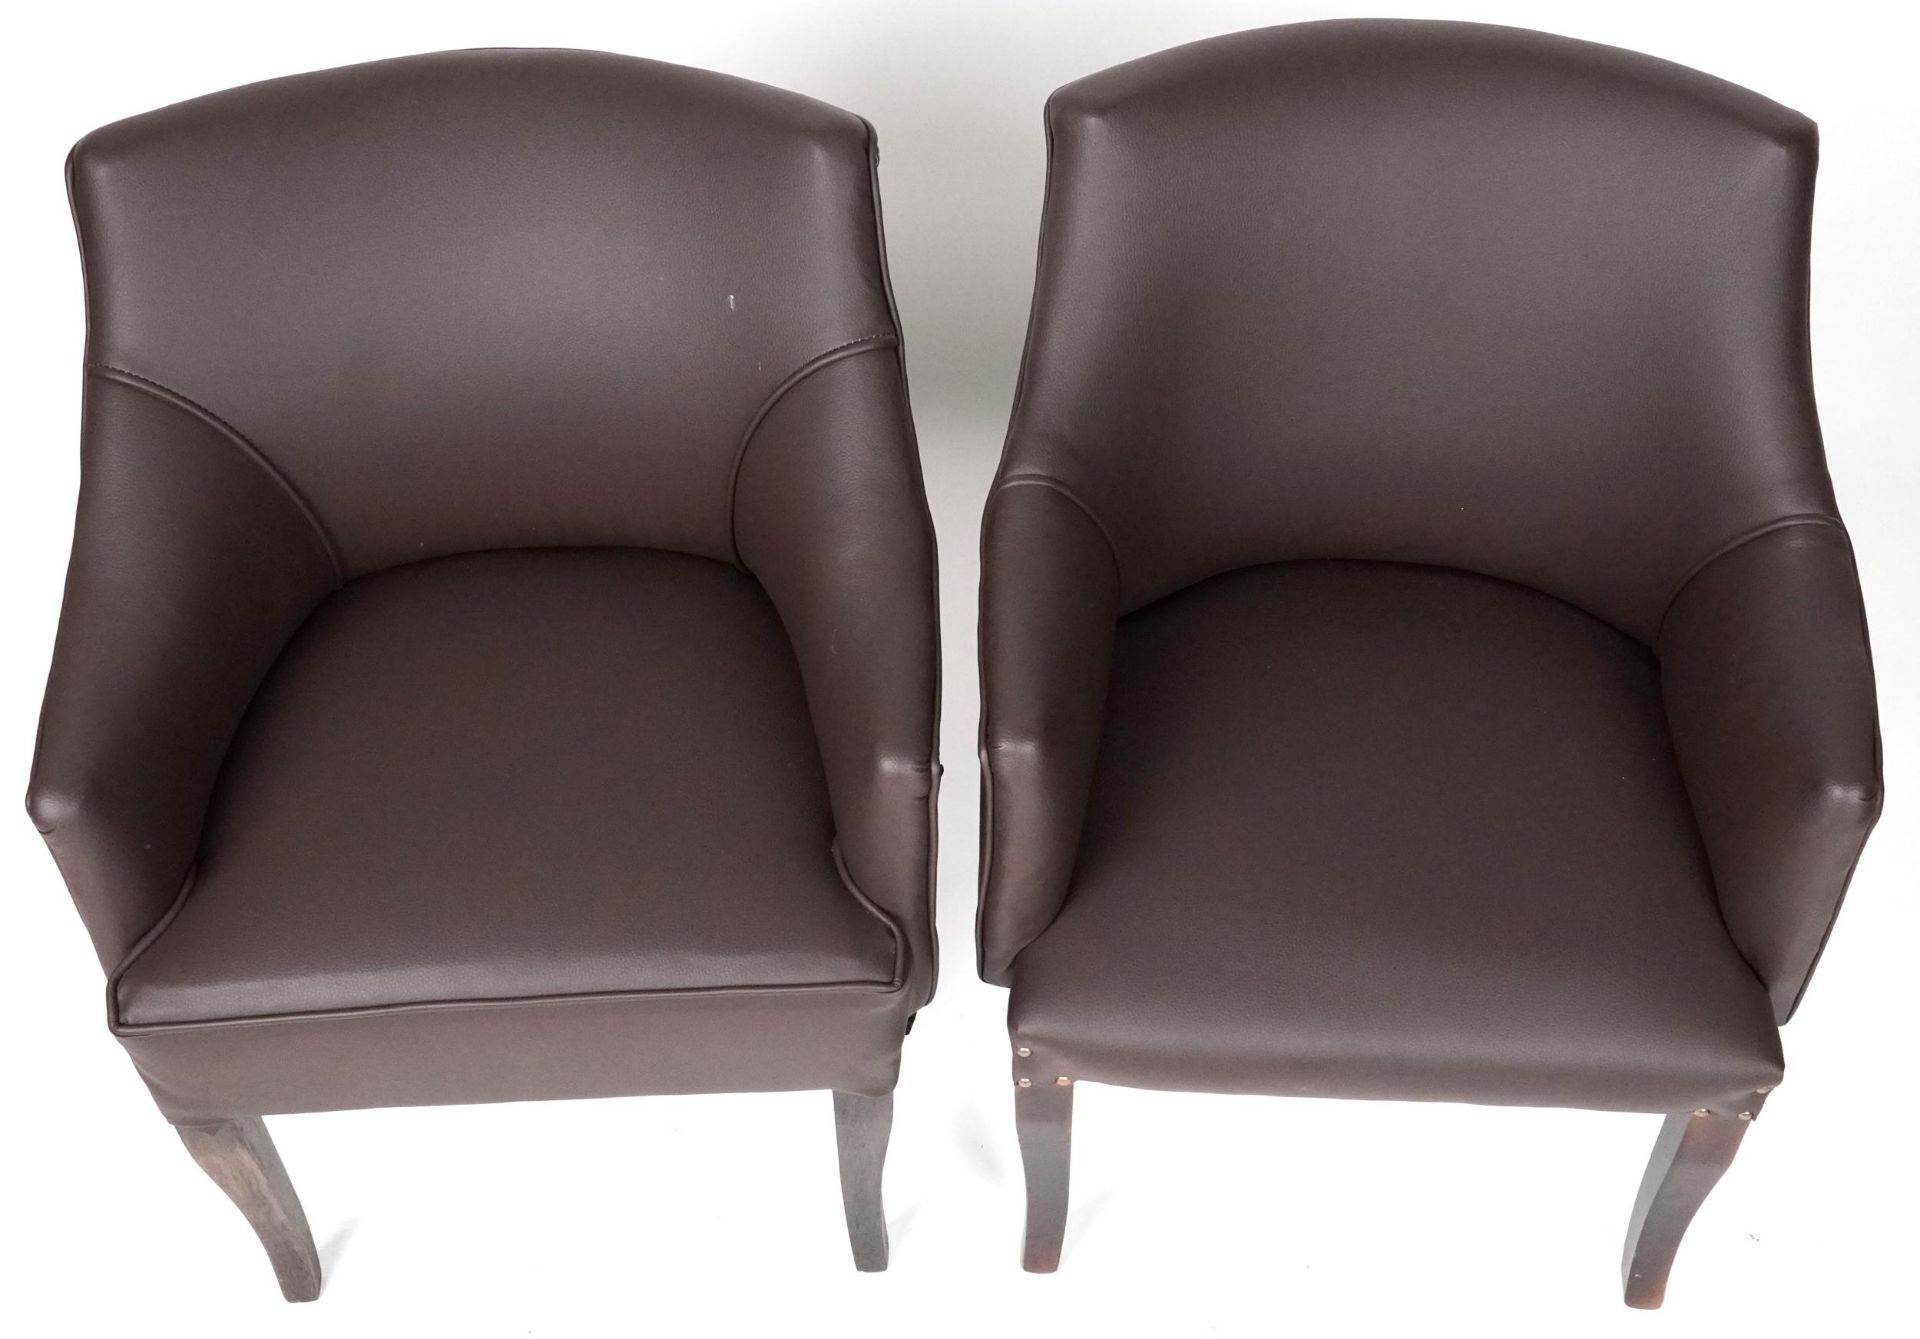 Pair of contemporary brown faux leather tub chairs, each 76cm high - Image 3 of 4